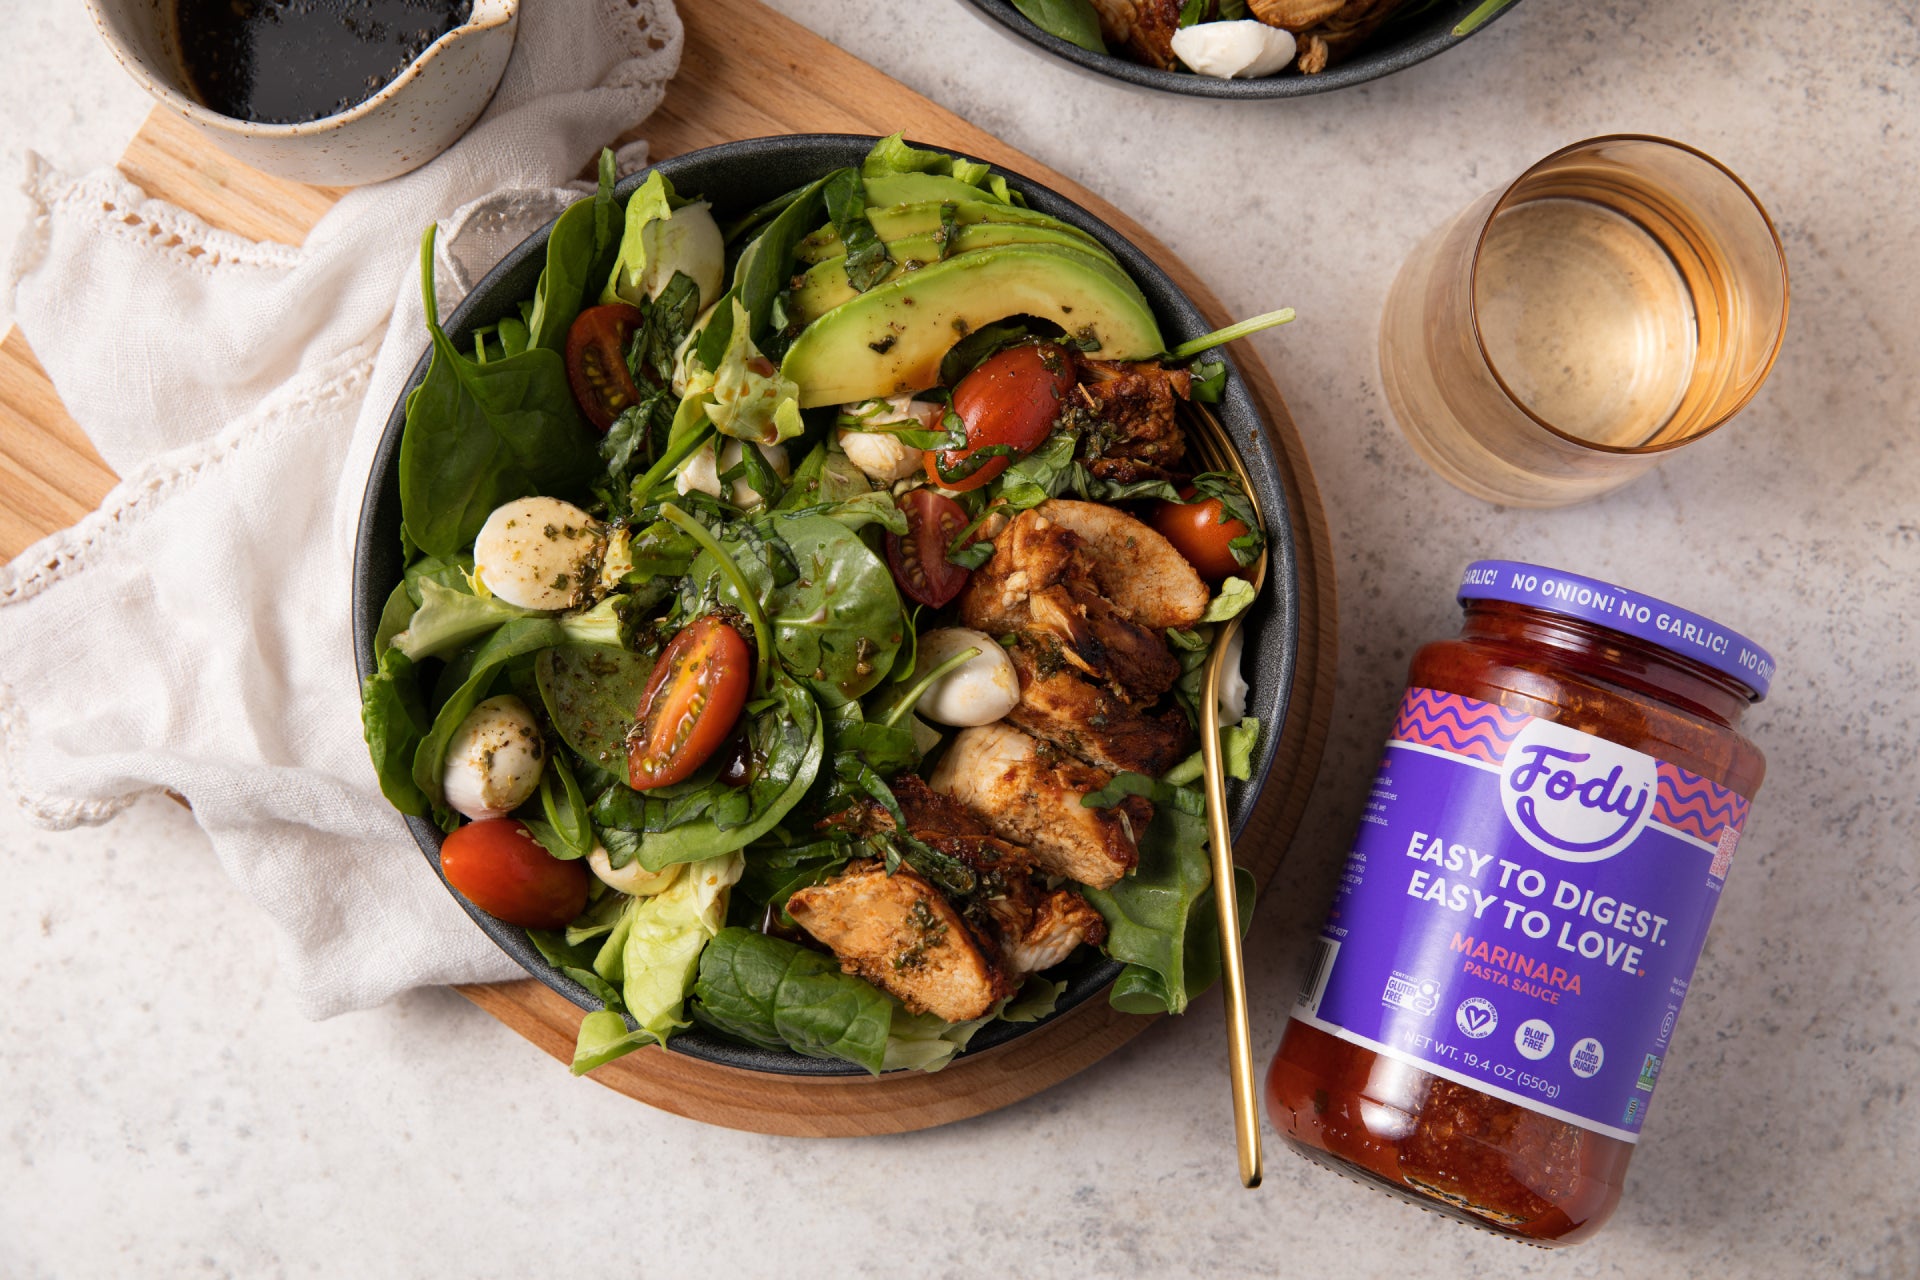 A Healthy Meal with Fody Foods Easy to Digest Marinara Pasta Sauce